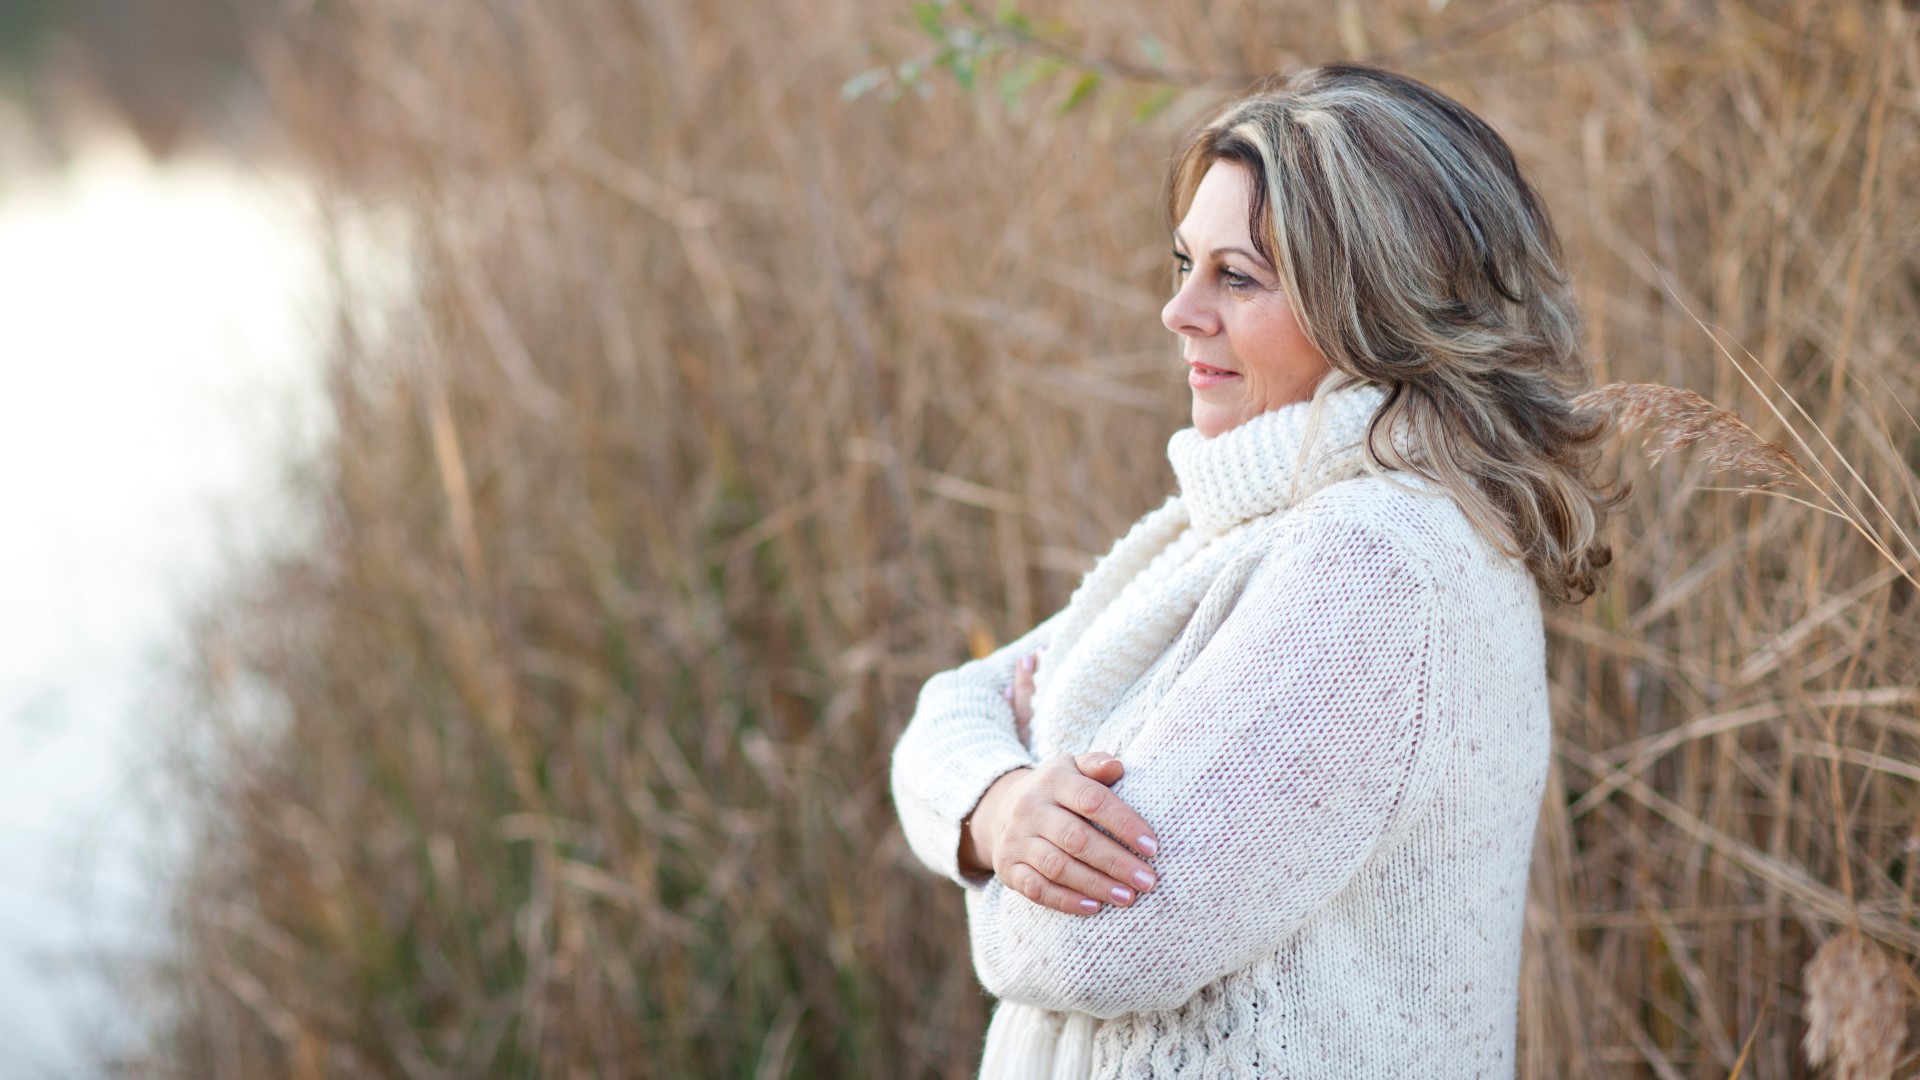 Leslie Draffin spoke with a menopause advocate and coach who explained what menopause is, common things to expect and ways you can have a more 'Magical' menopause.